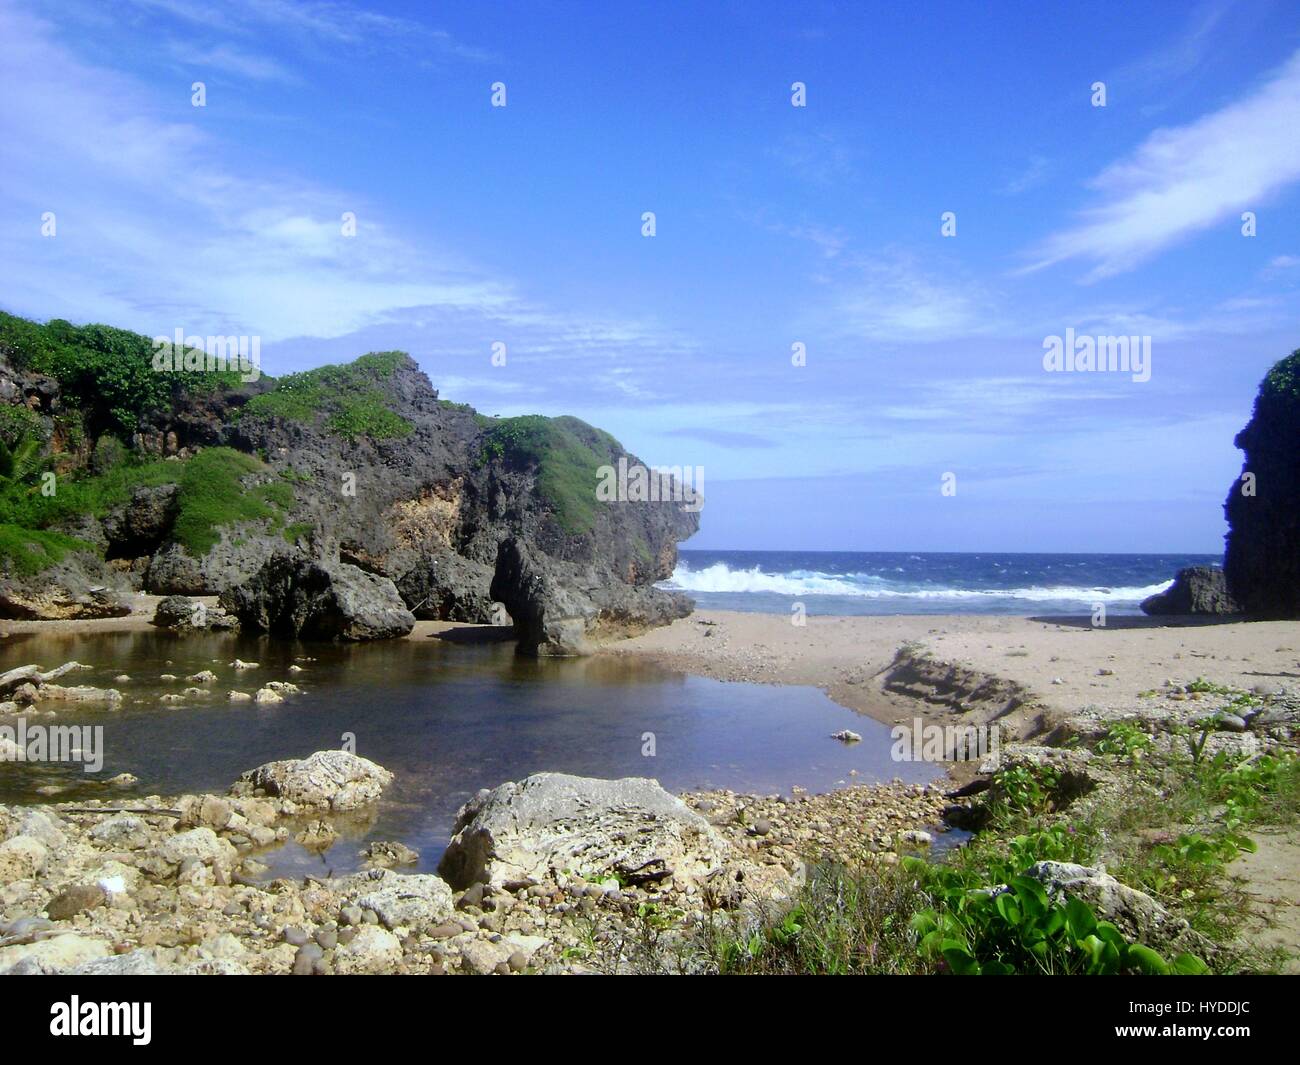 Hidden Beach, Saipan Located in Talafofo, the Hidden Beach is one of Saipan’s gems with lovely cliffs and stone formations. Stock Photo